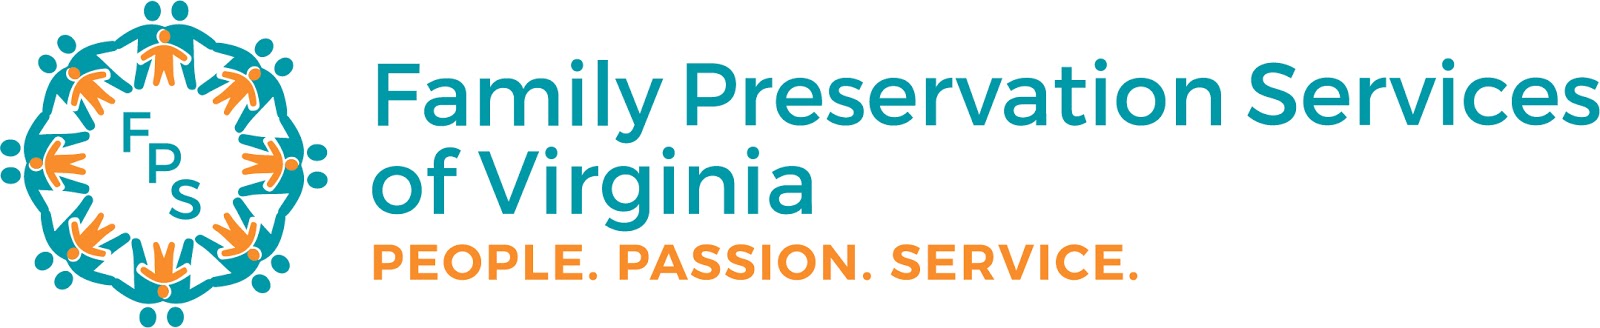 Family Preservation Services - Roanoke Office